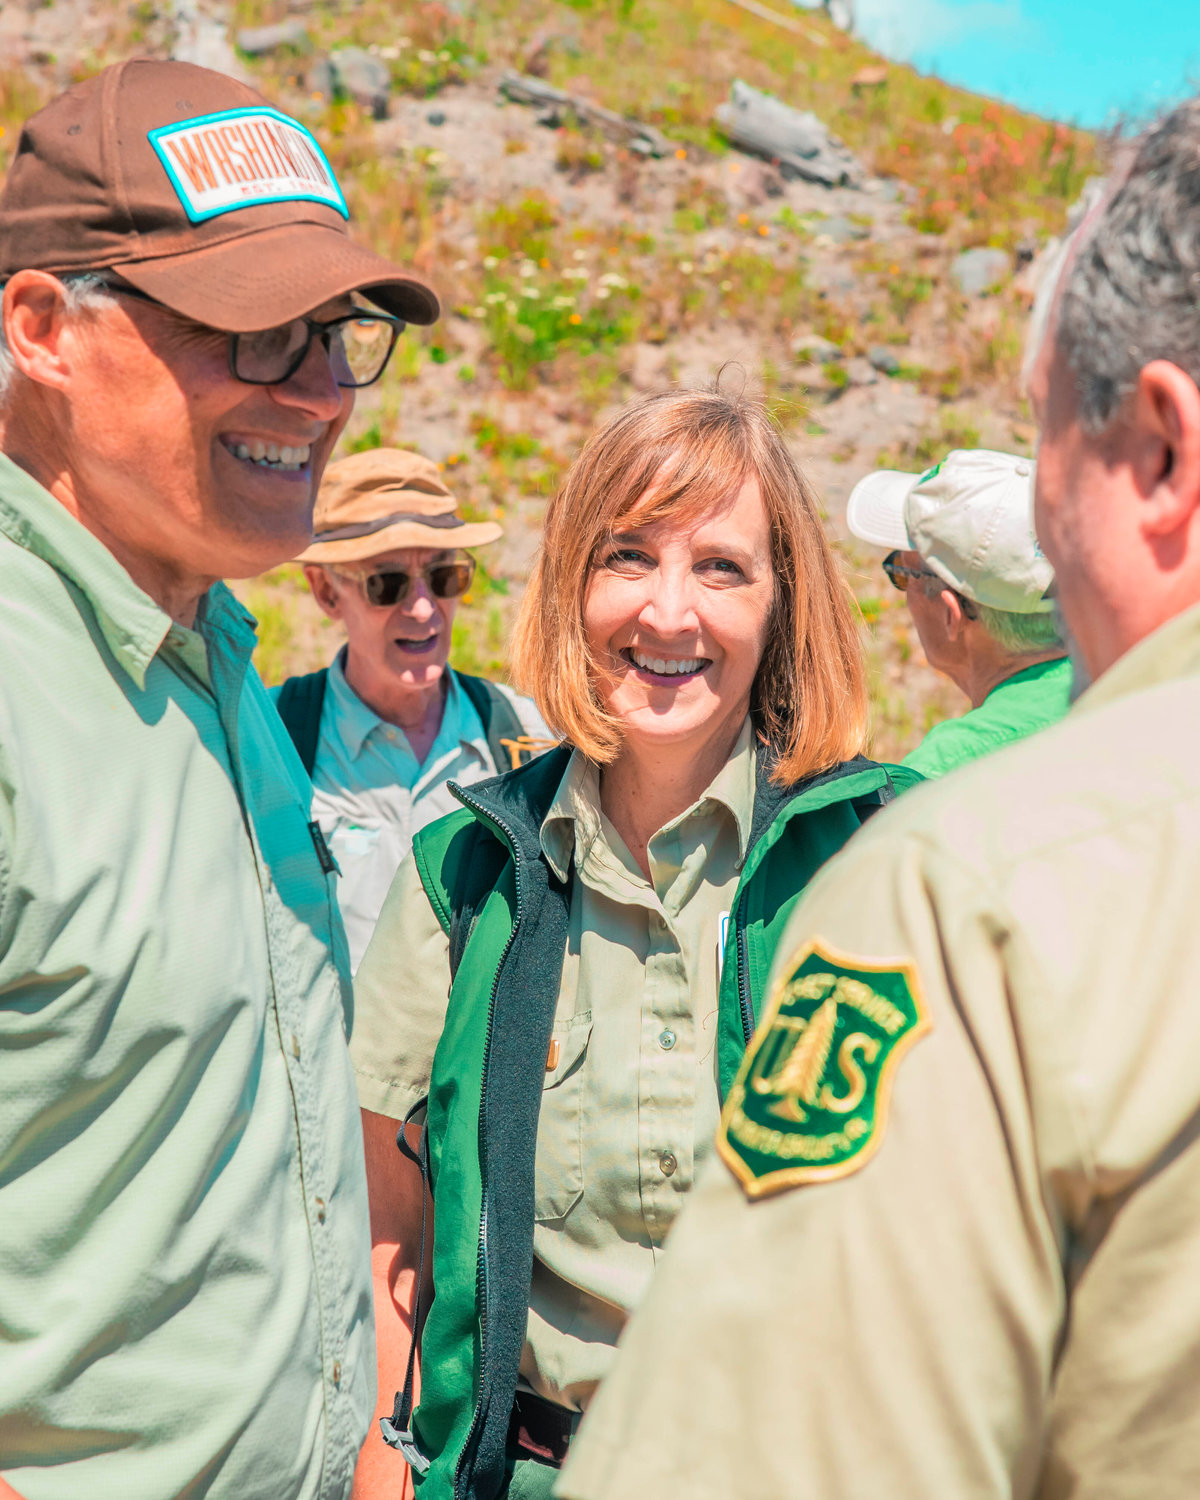 Gala Miller, Community Engagement Specialist with the U.S. Forest Service mingles with Gov. Jay Inslee and Bill Nye during a visit to the Johnston Ridge Observatory Thursday afternoon.